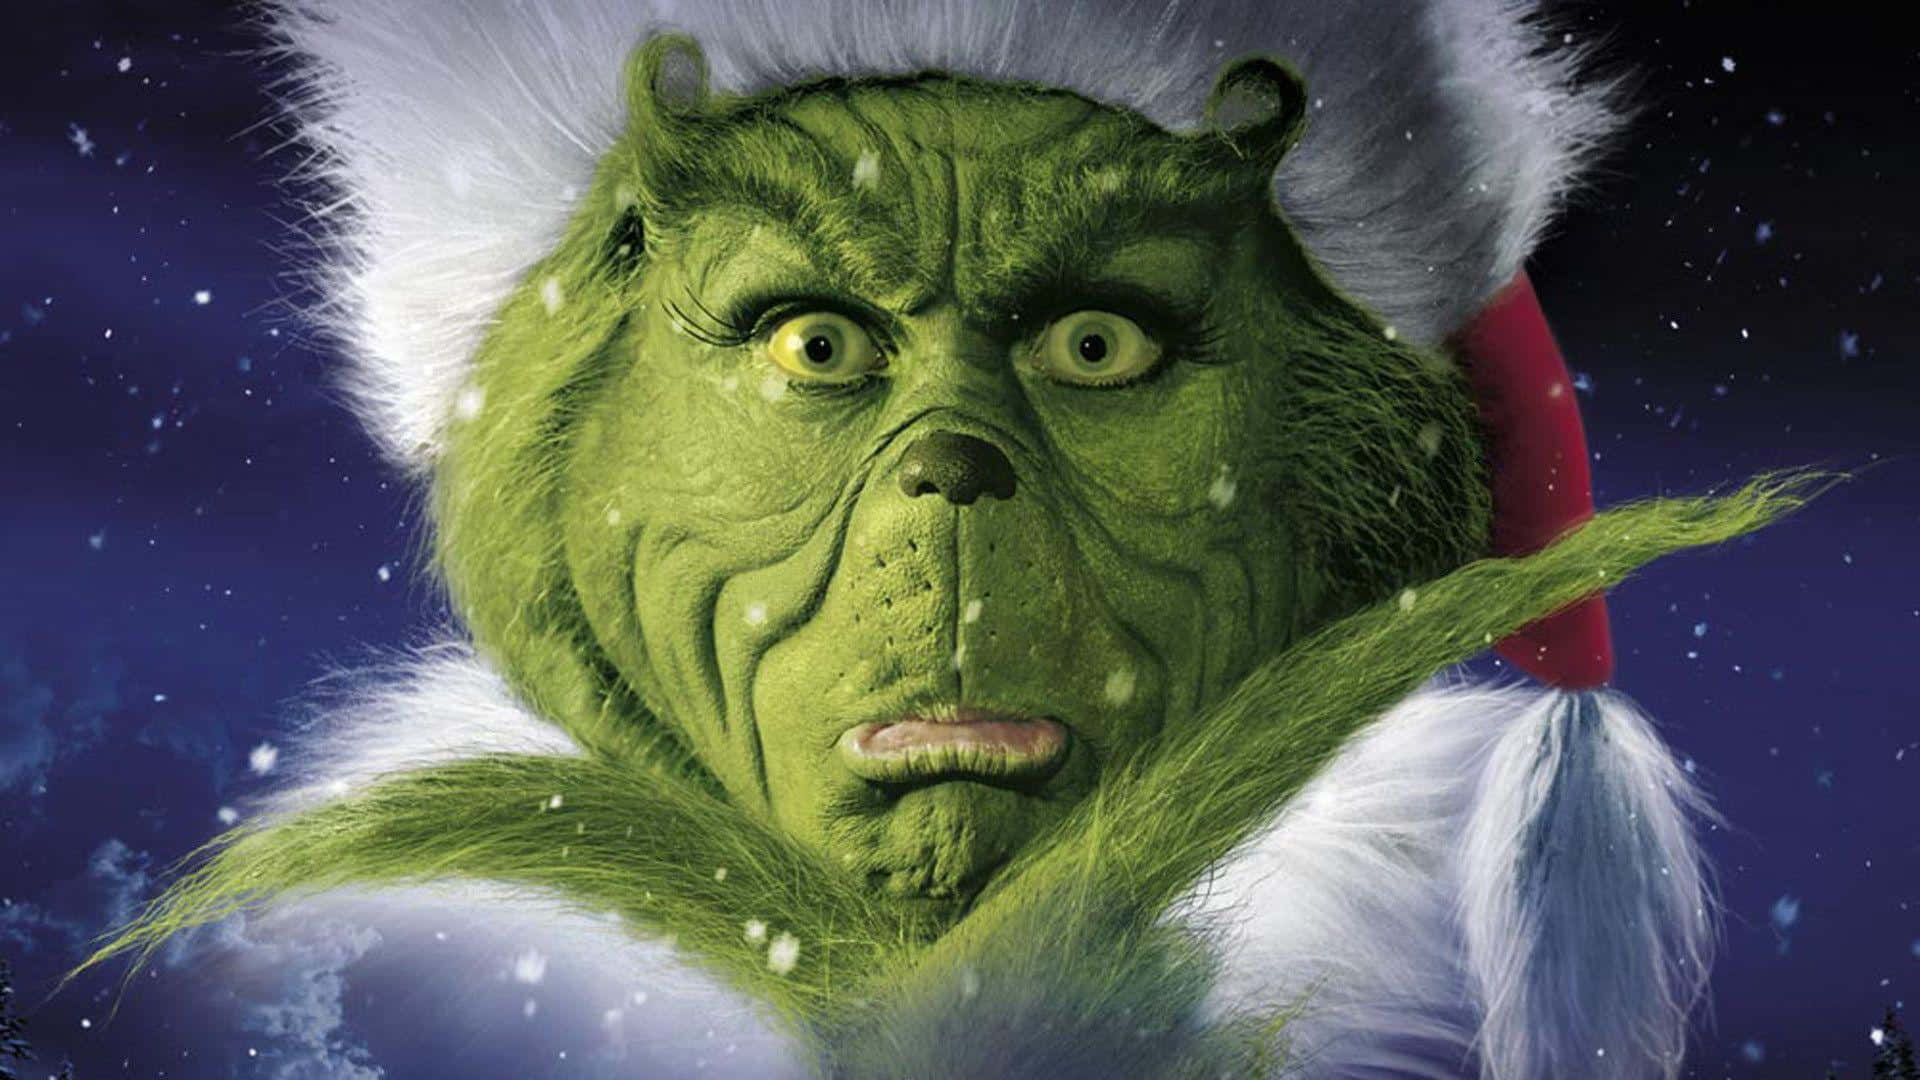 This Grinch Is Too Cute To Be Mean